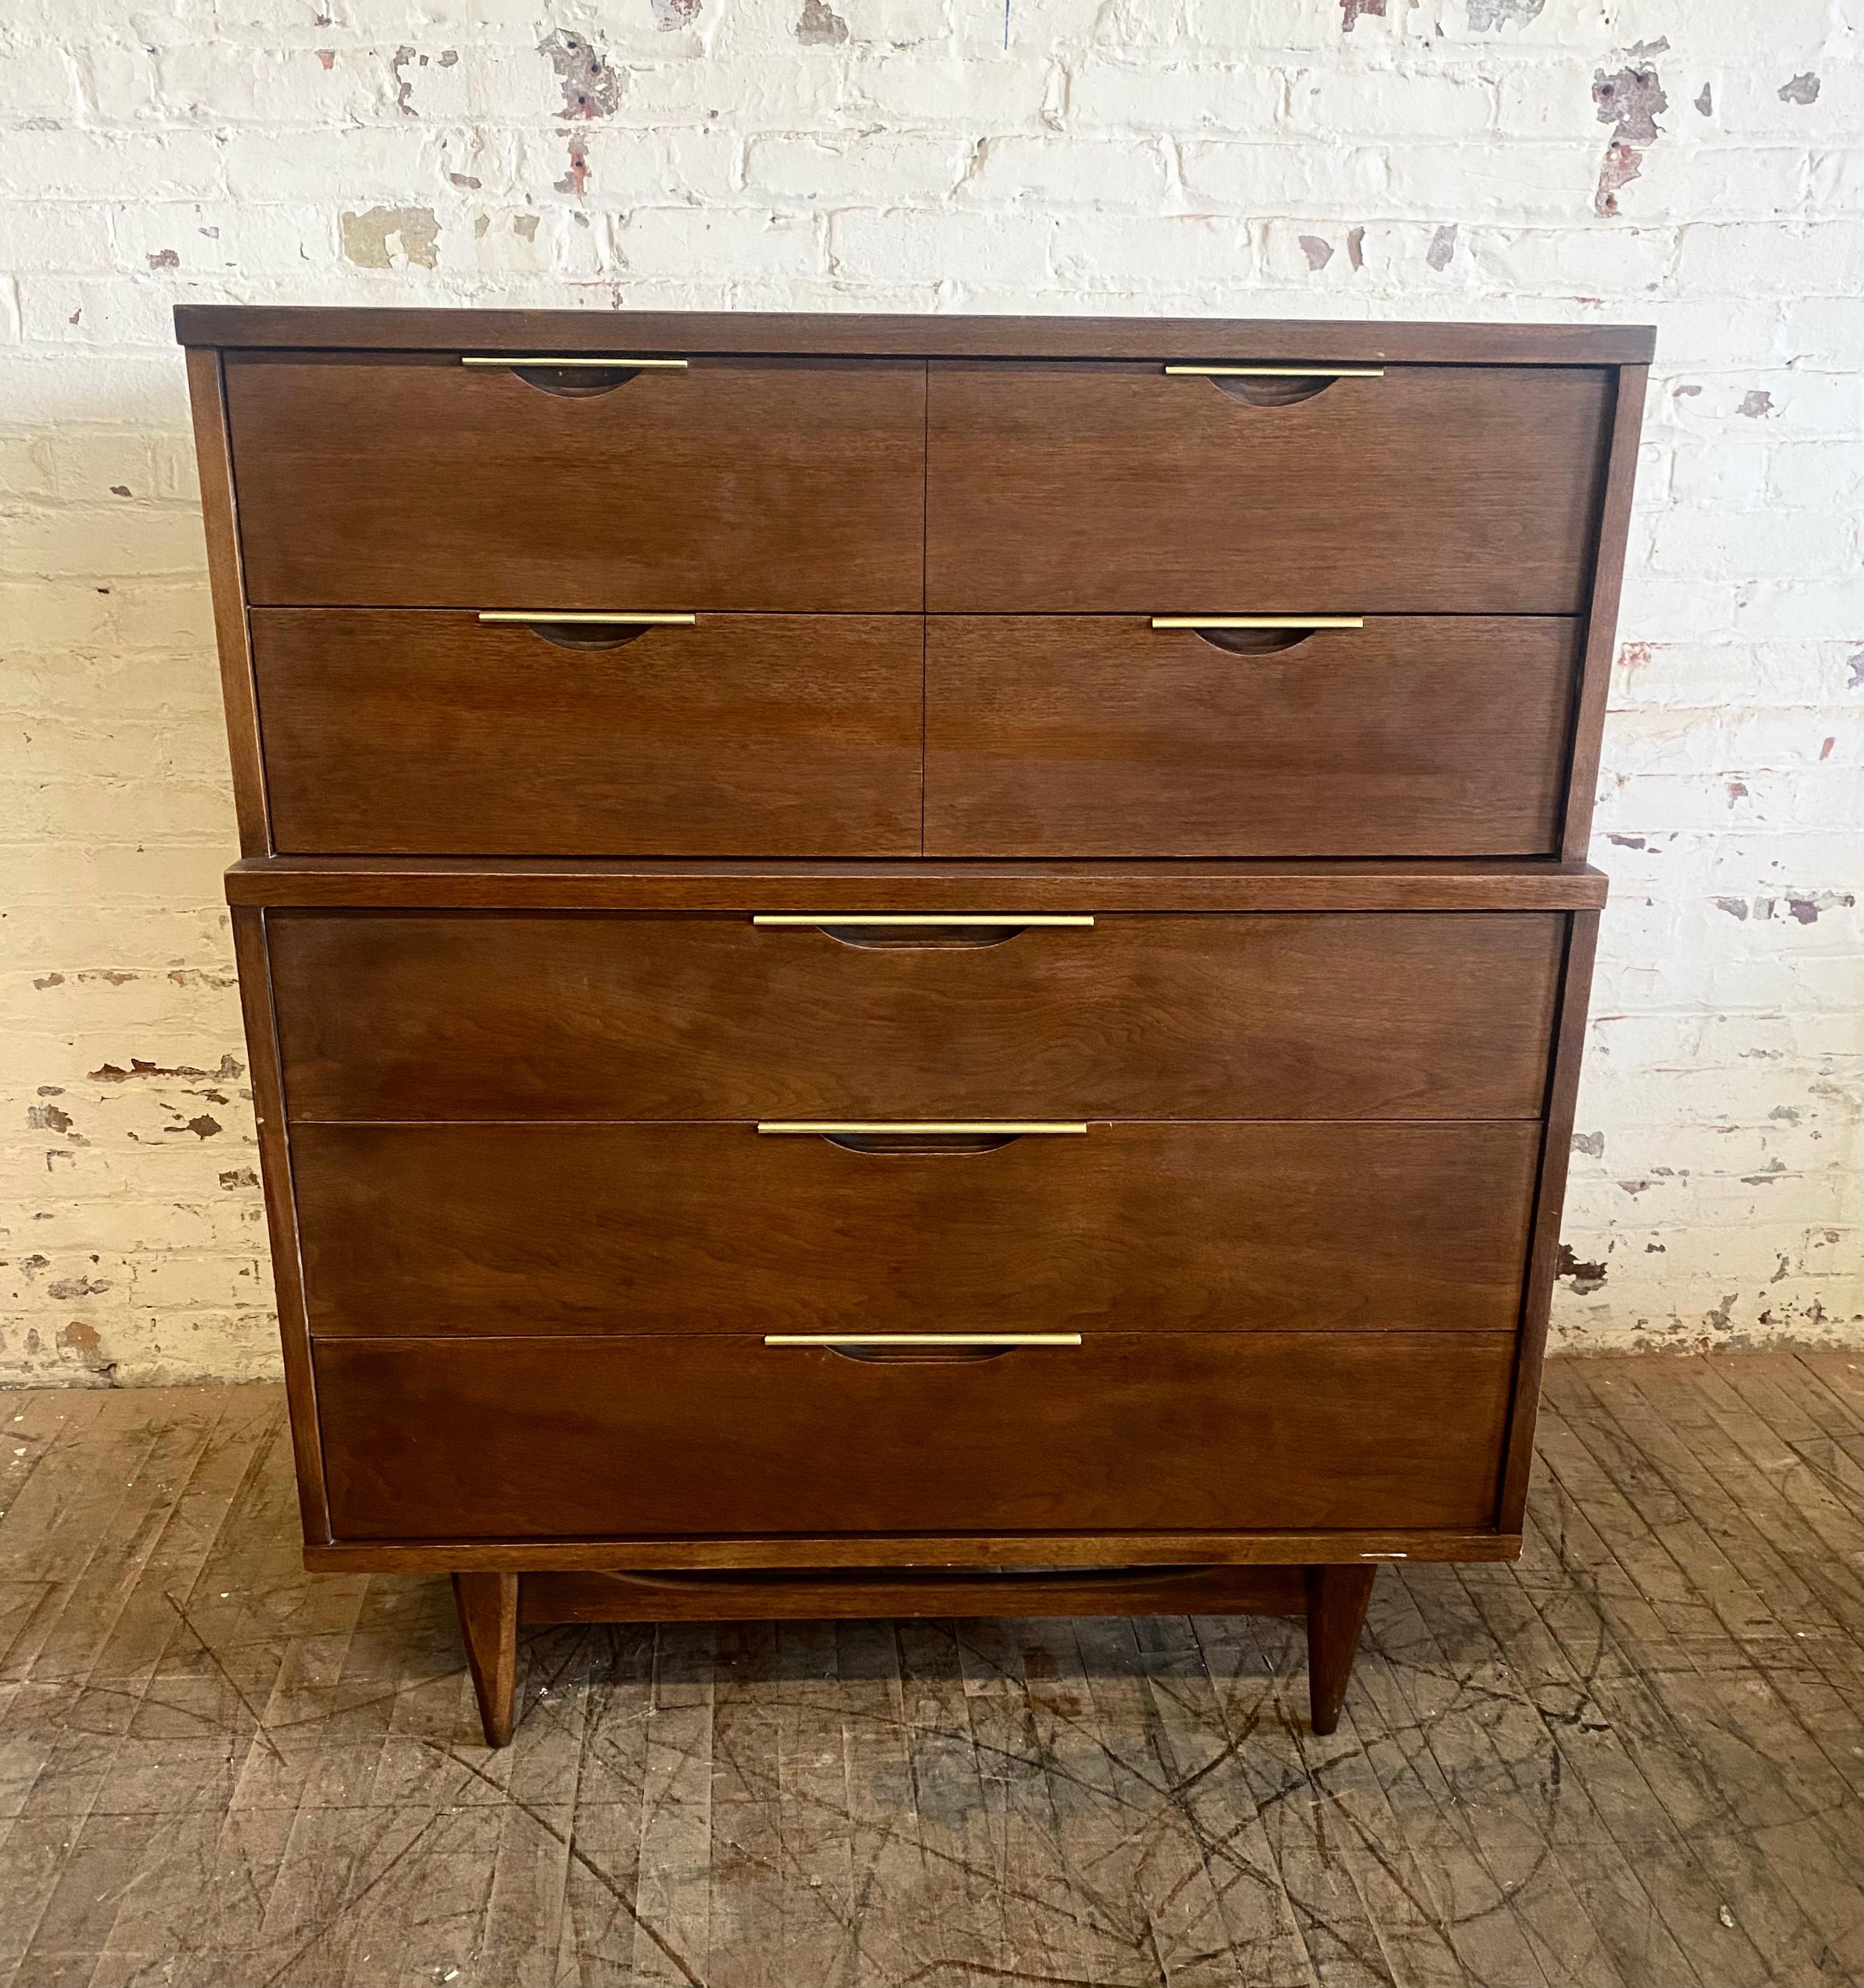 Modernist walnut and brass chest or drawers by Kent Coffey 